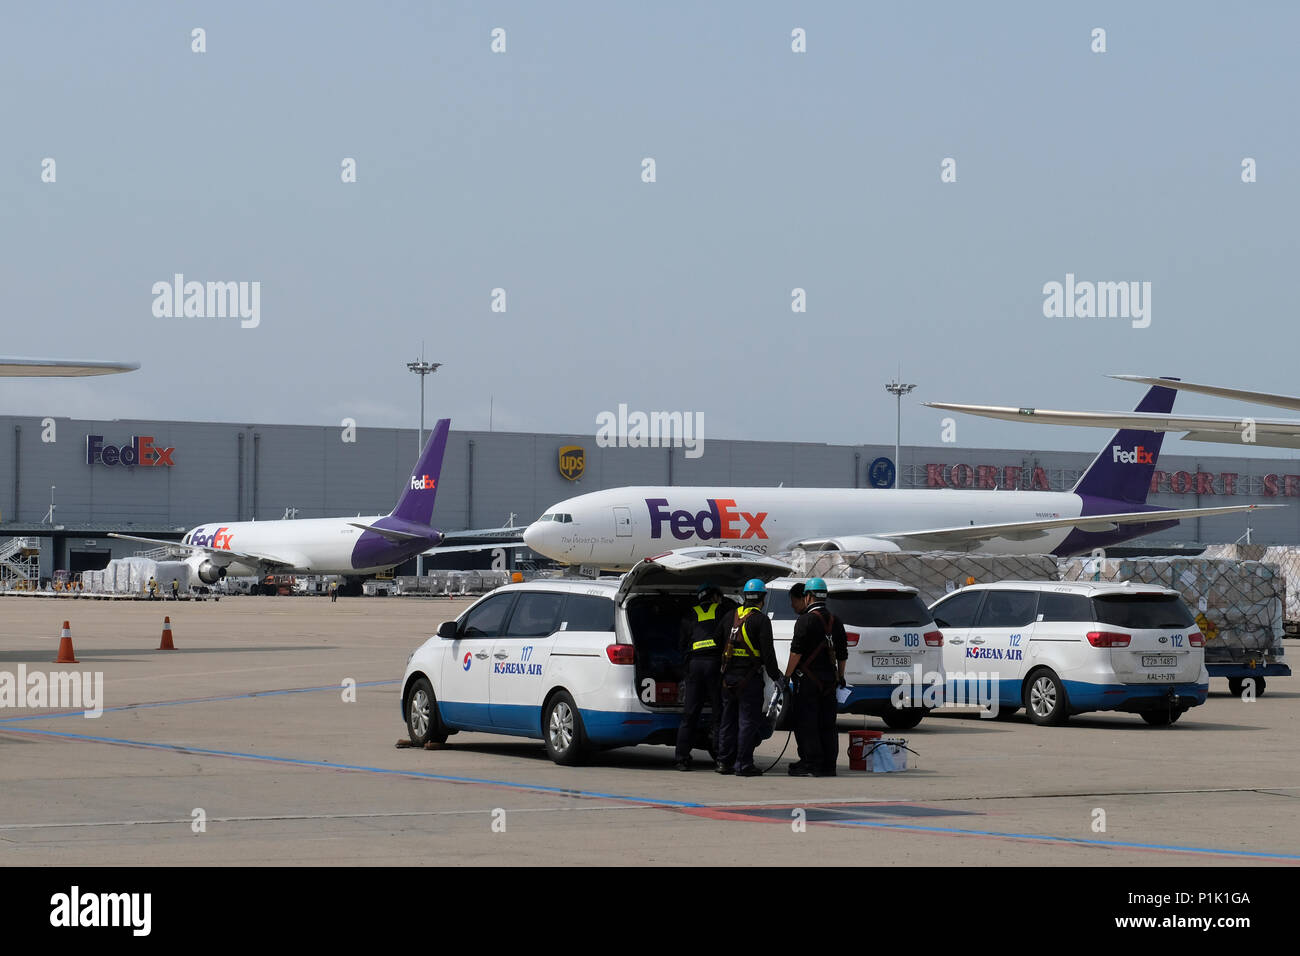 FedEx cargo planes parked on the tarmac at the cargo terminal in Incheon International Airport sometimes referred to as Seoul–Incheon International Airport the largest airport in South Korea located west of the city of Incheon Stock Photo